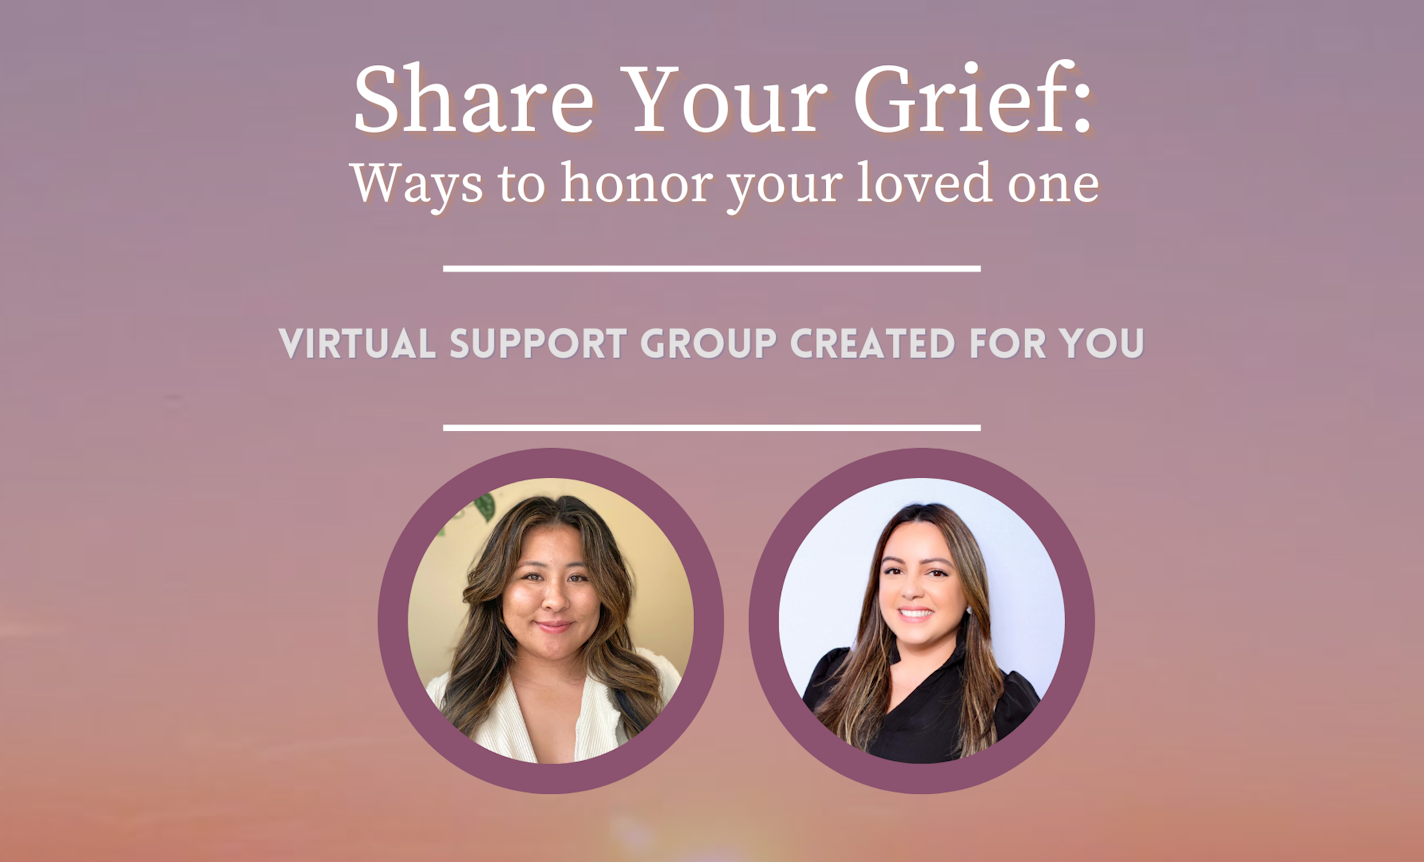 Share Your Grief: Ways to Honor Your Loved One (via Zoom)